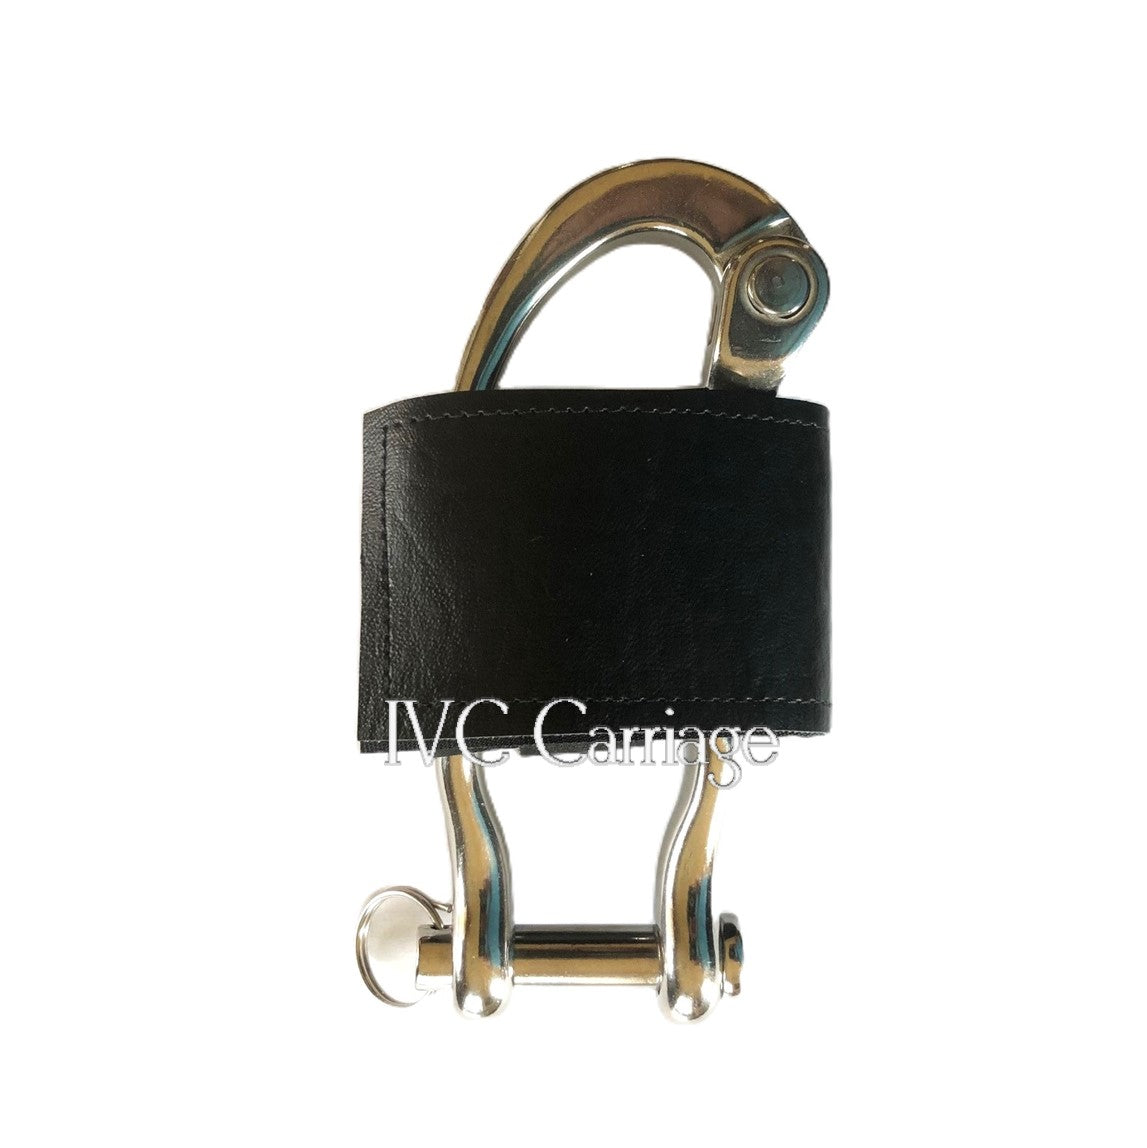 Two Shackle Pulls Hitched Together | IVC Carriage